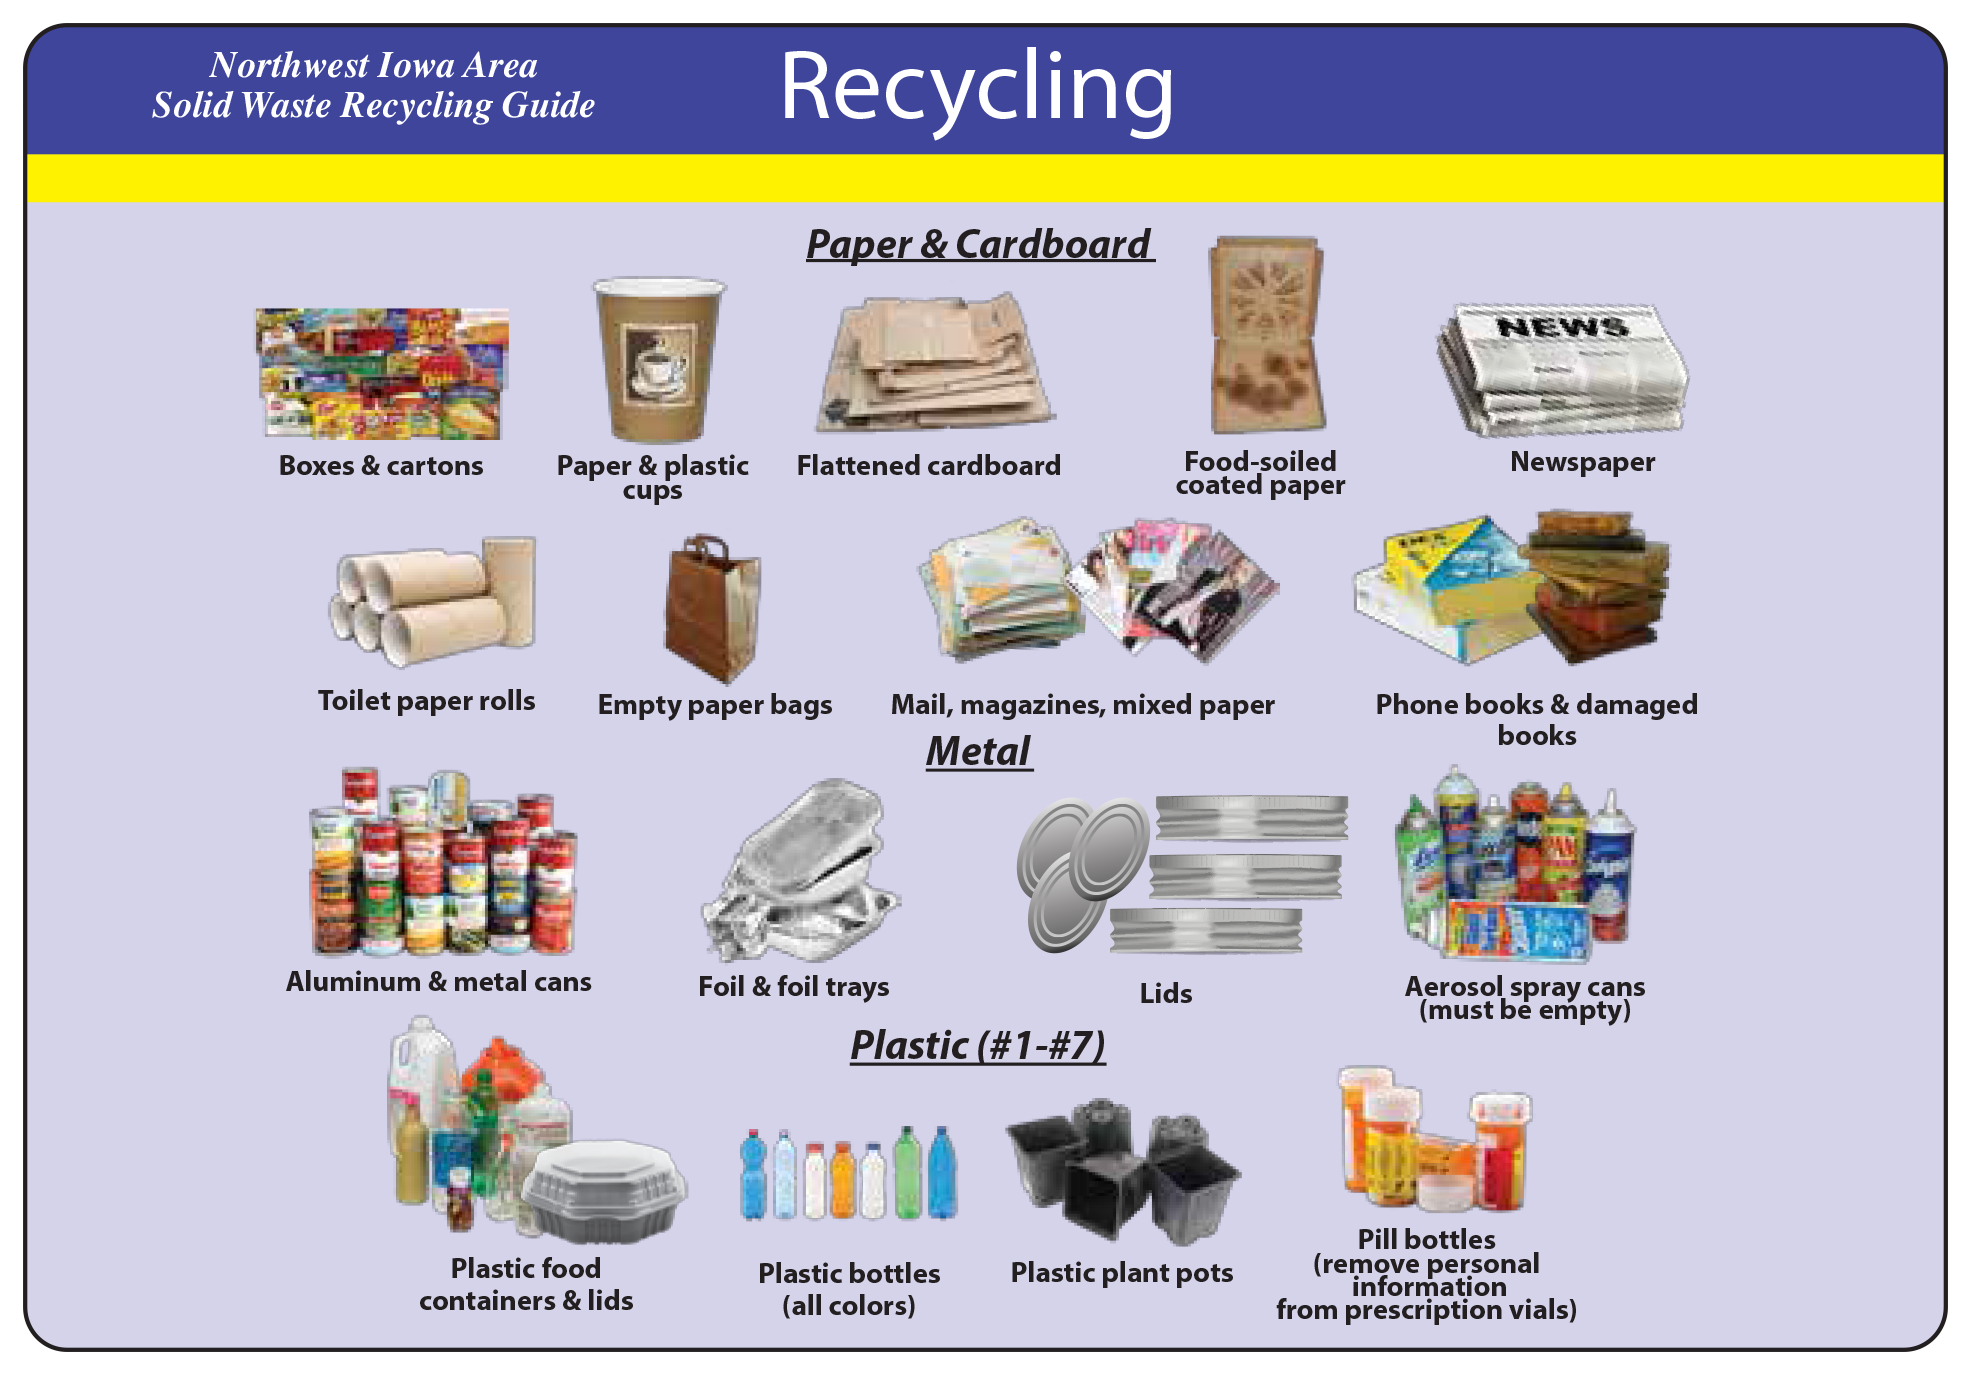 https://nwialandfill.com/wp-content/uploads/2020/07/Recycling-Postcard-005-1.png